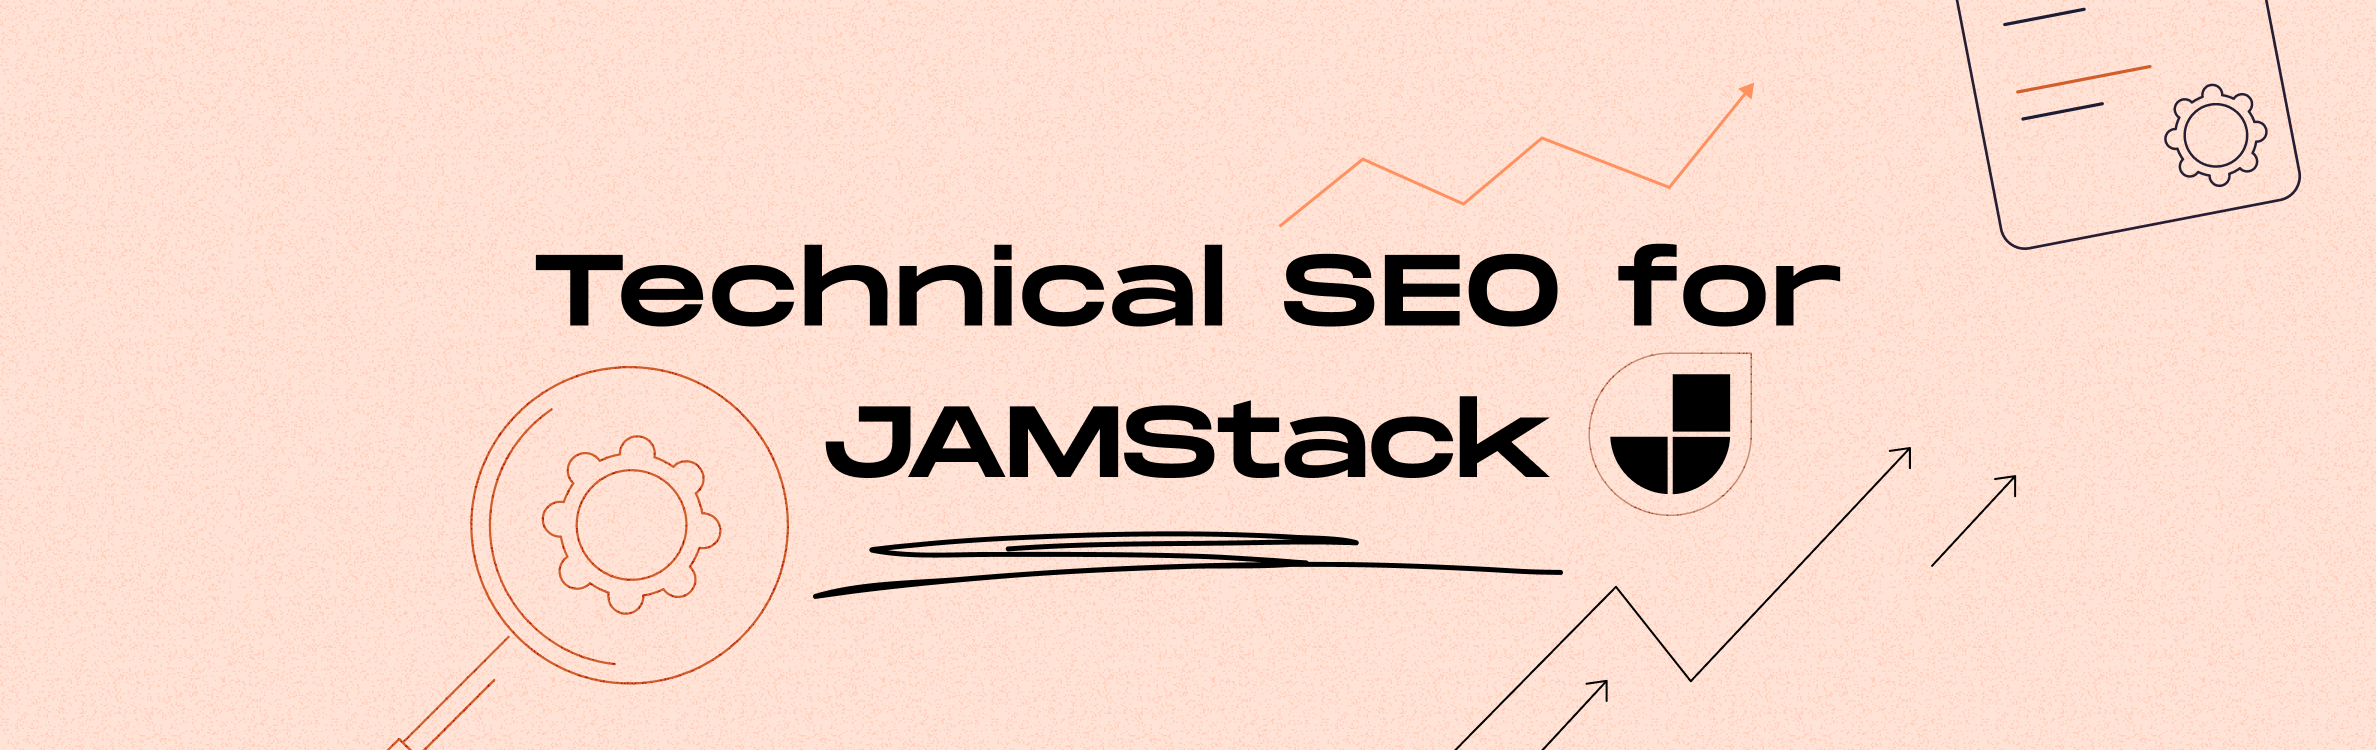 technical seo for jemstack